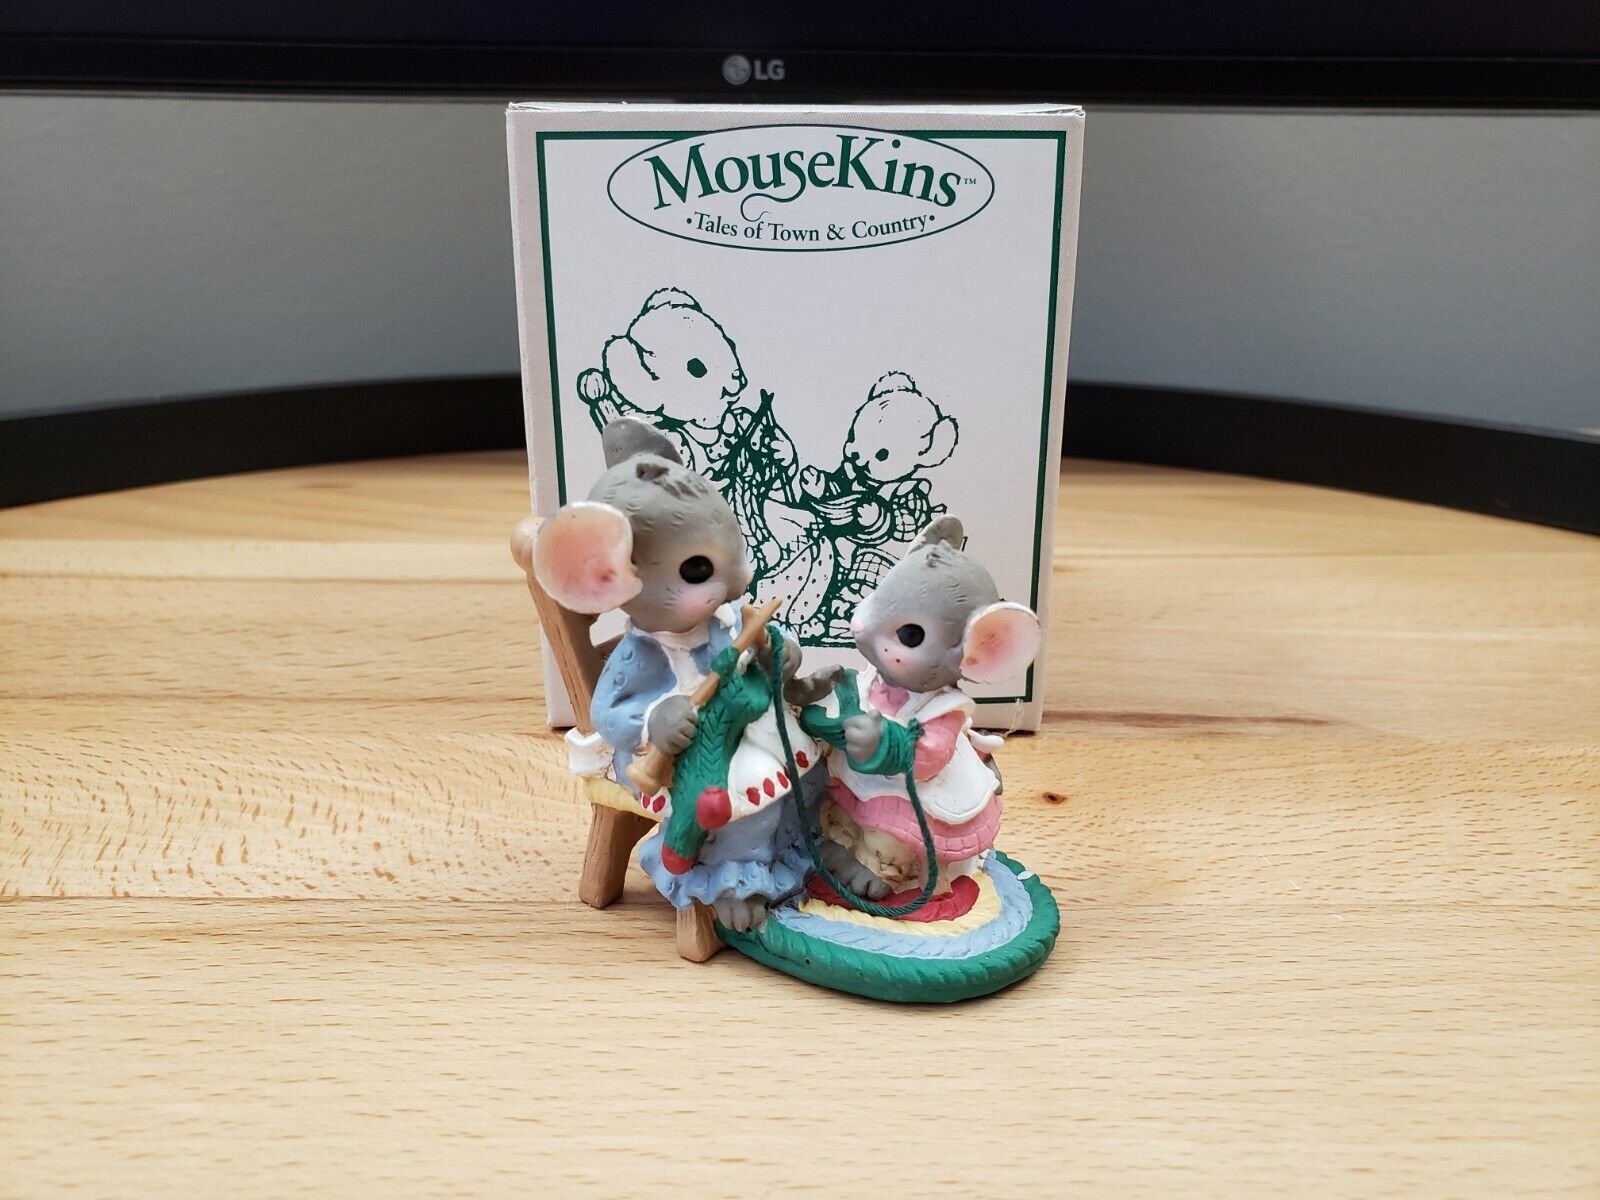 Midwest MouseKins Florence & Holly Burroughs Figurine Tales of Town & Country